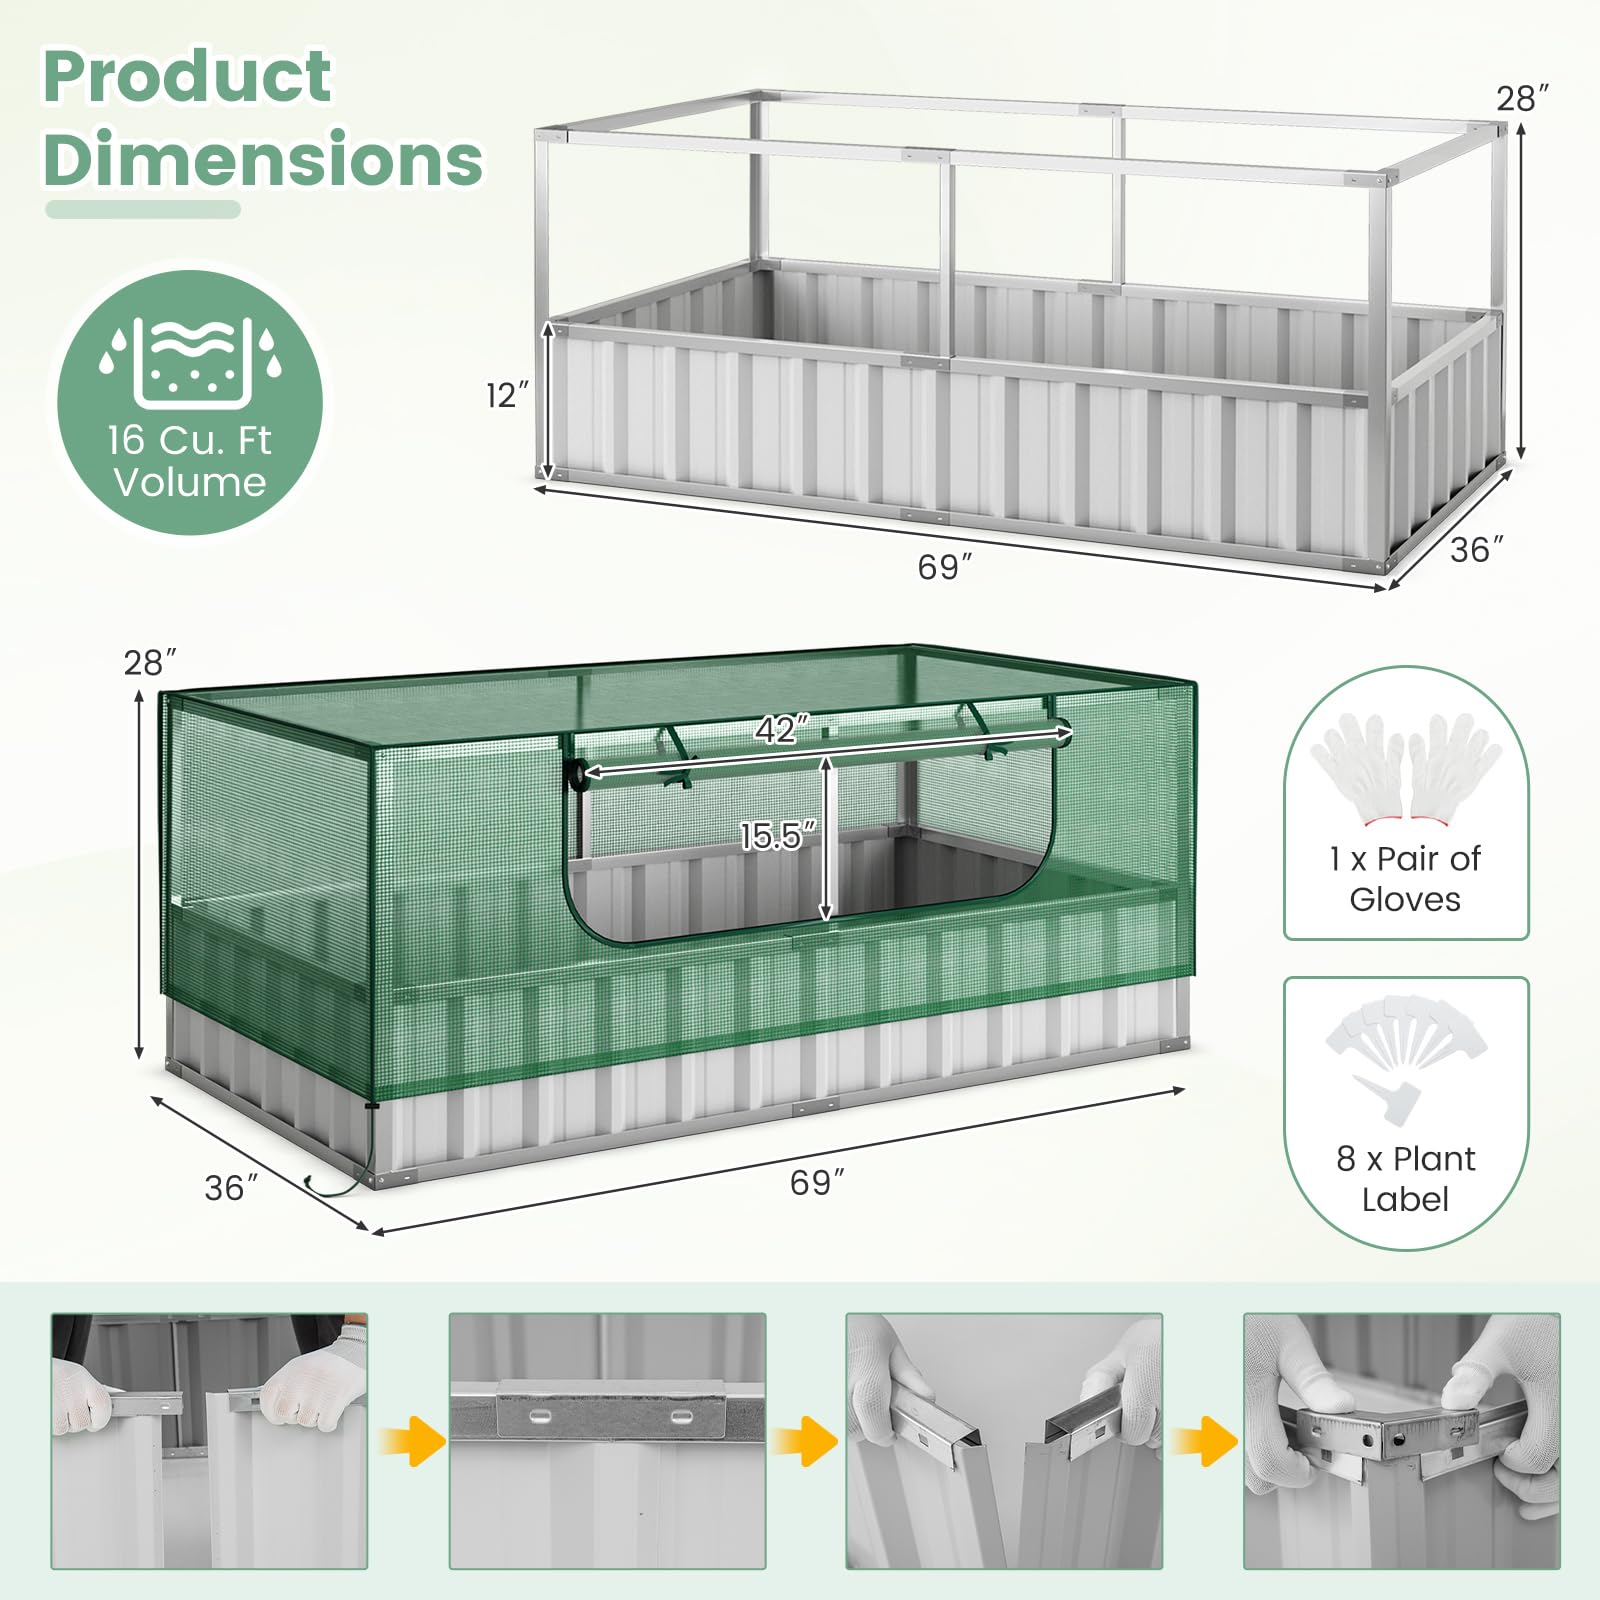 Giantex 69”x36”x28” Raised Garden Bed with Cover, 16.5 Cu.Ft Galvanized Steel Planter Box Kit